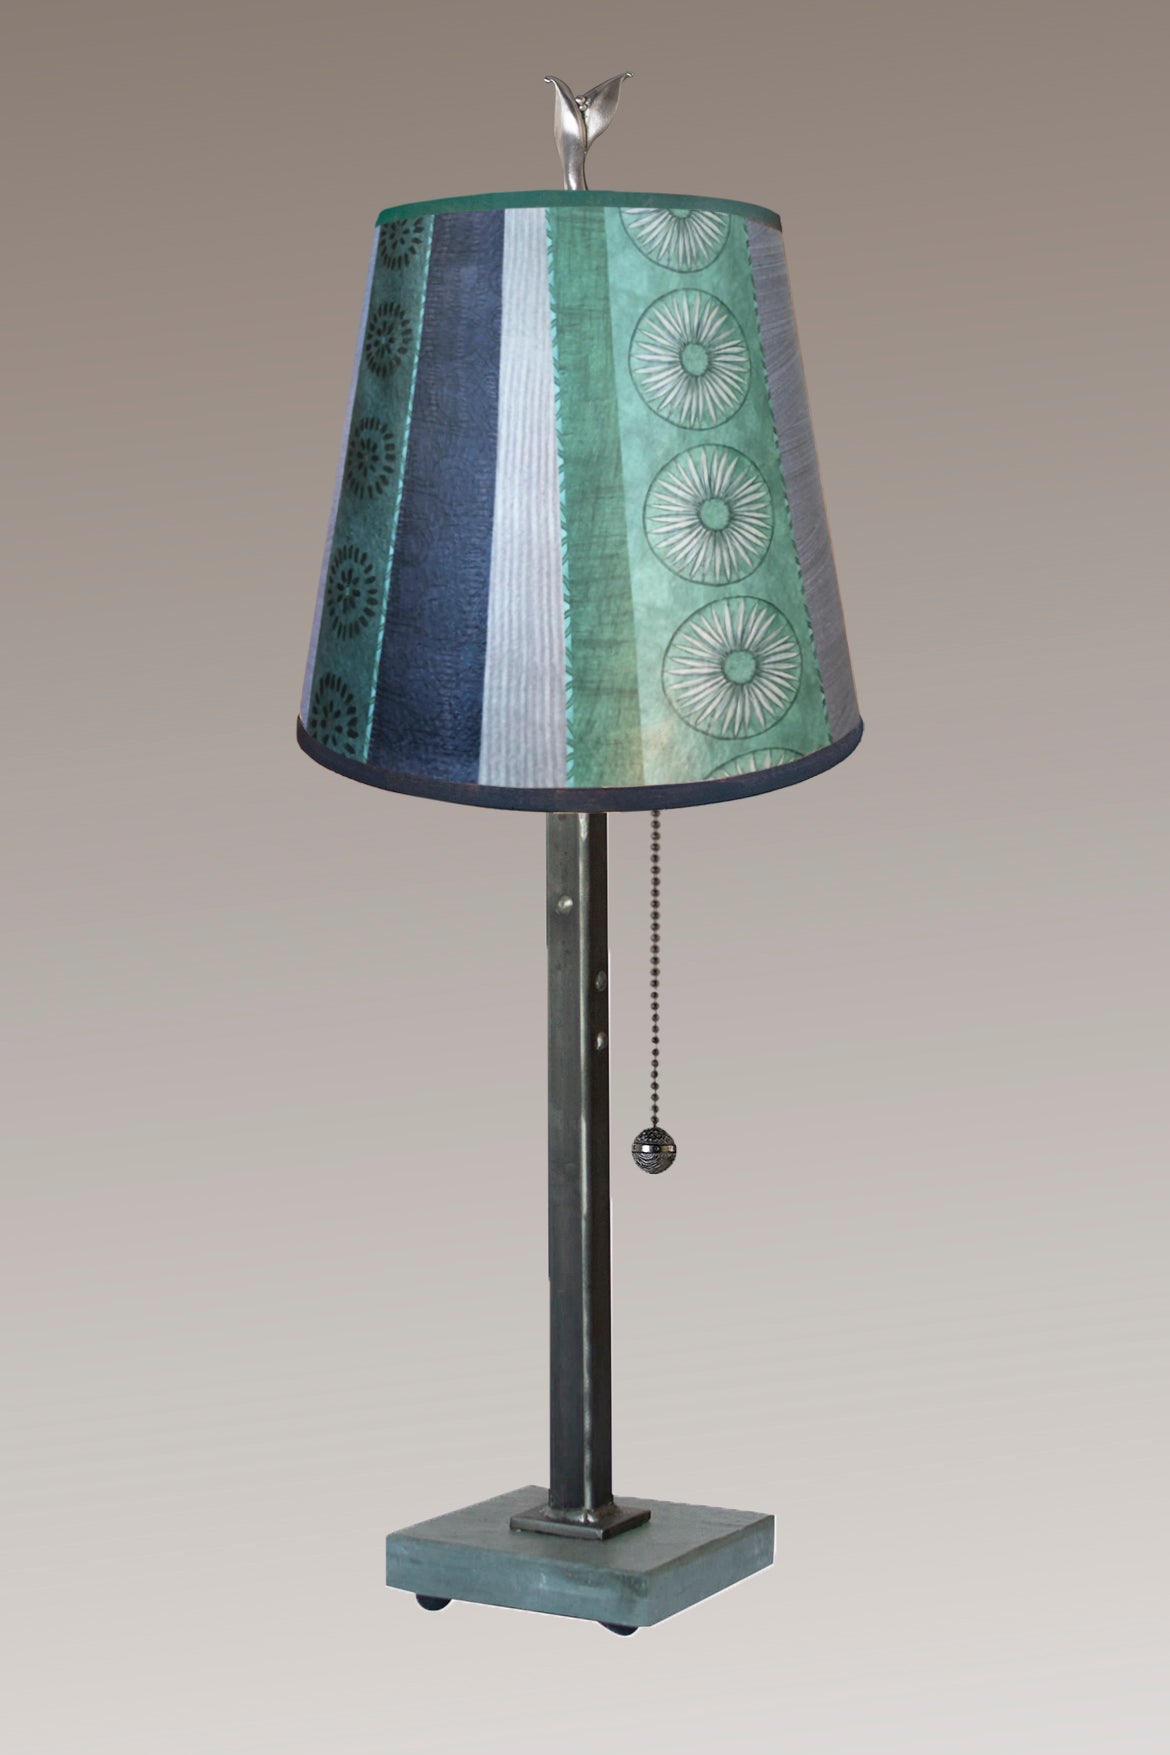 Janna Ugone &amp; Co Table Lamps Steel Table Lamp with Small Drum Shade in Serape Waters